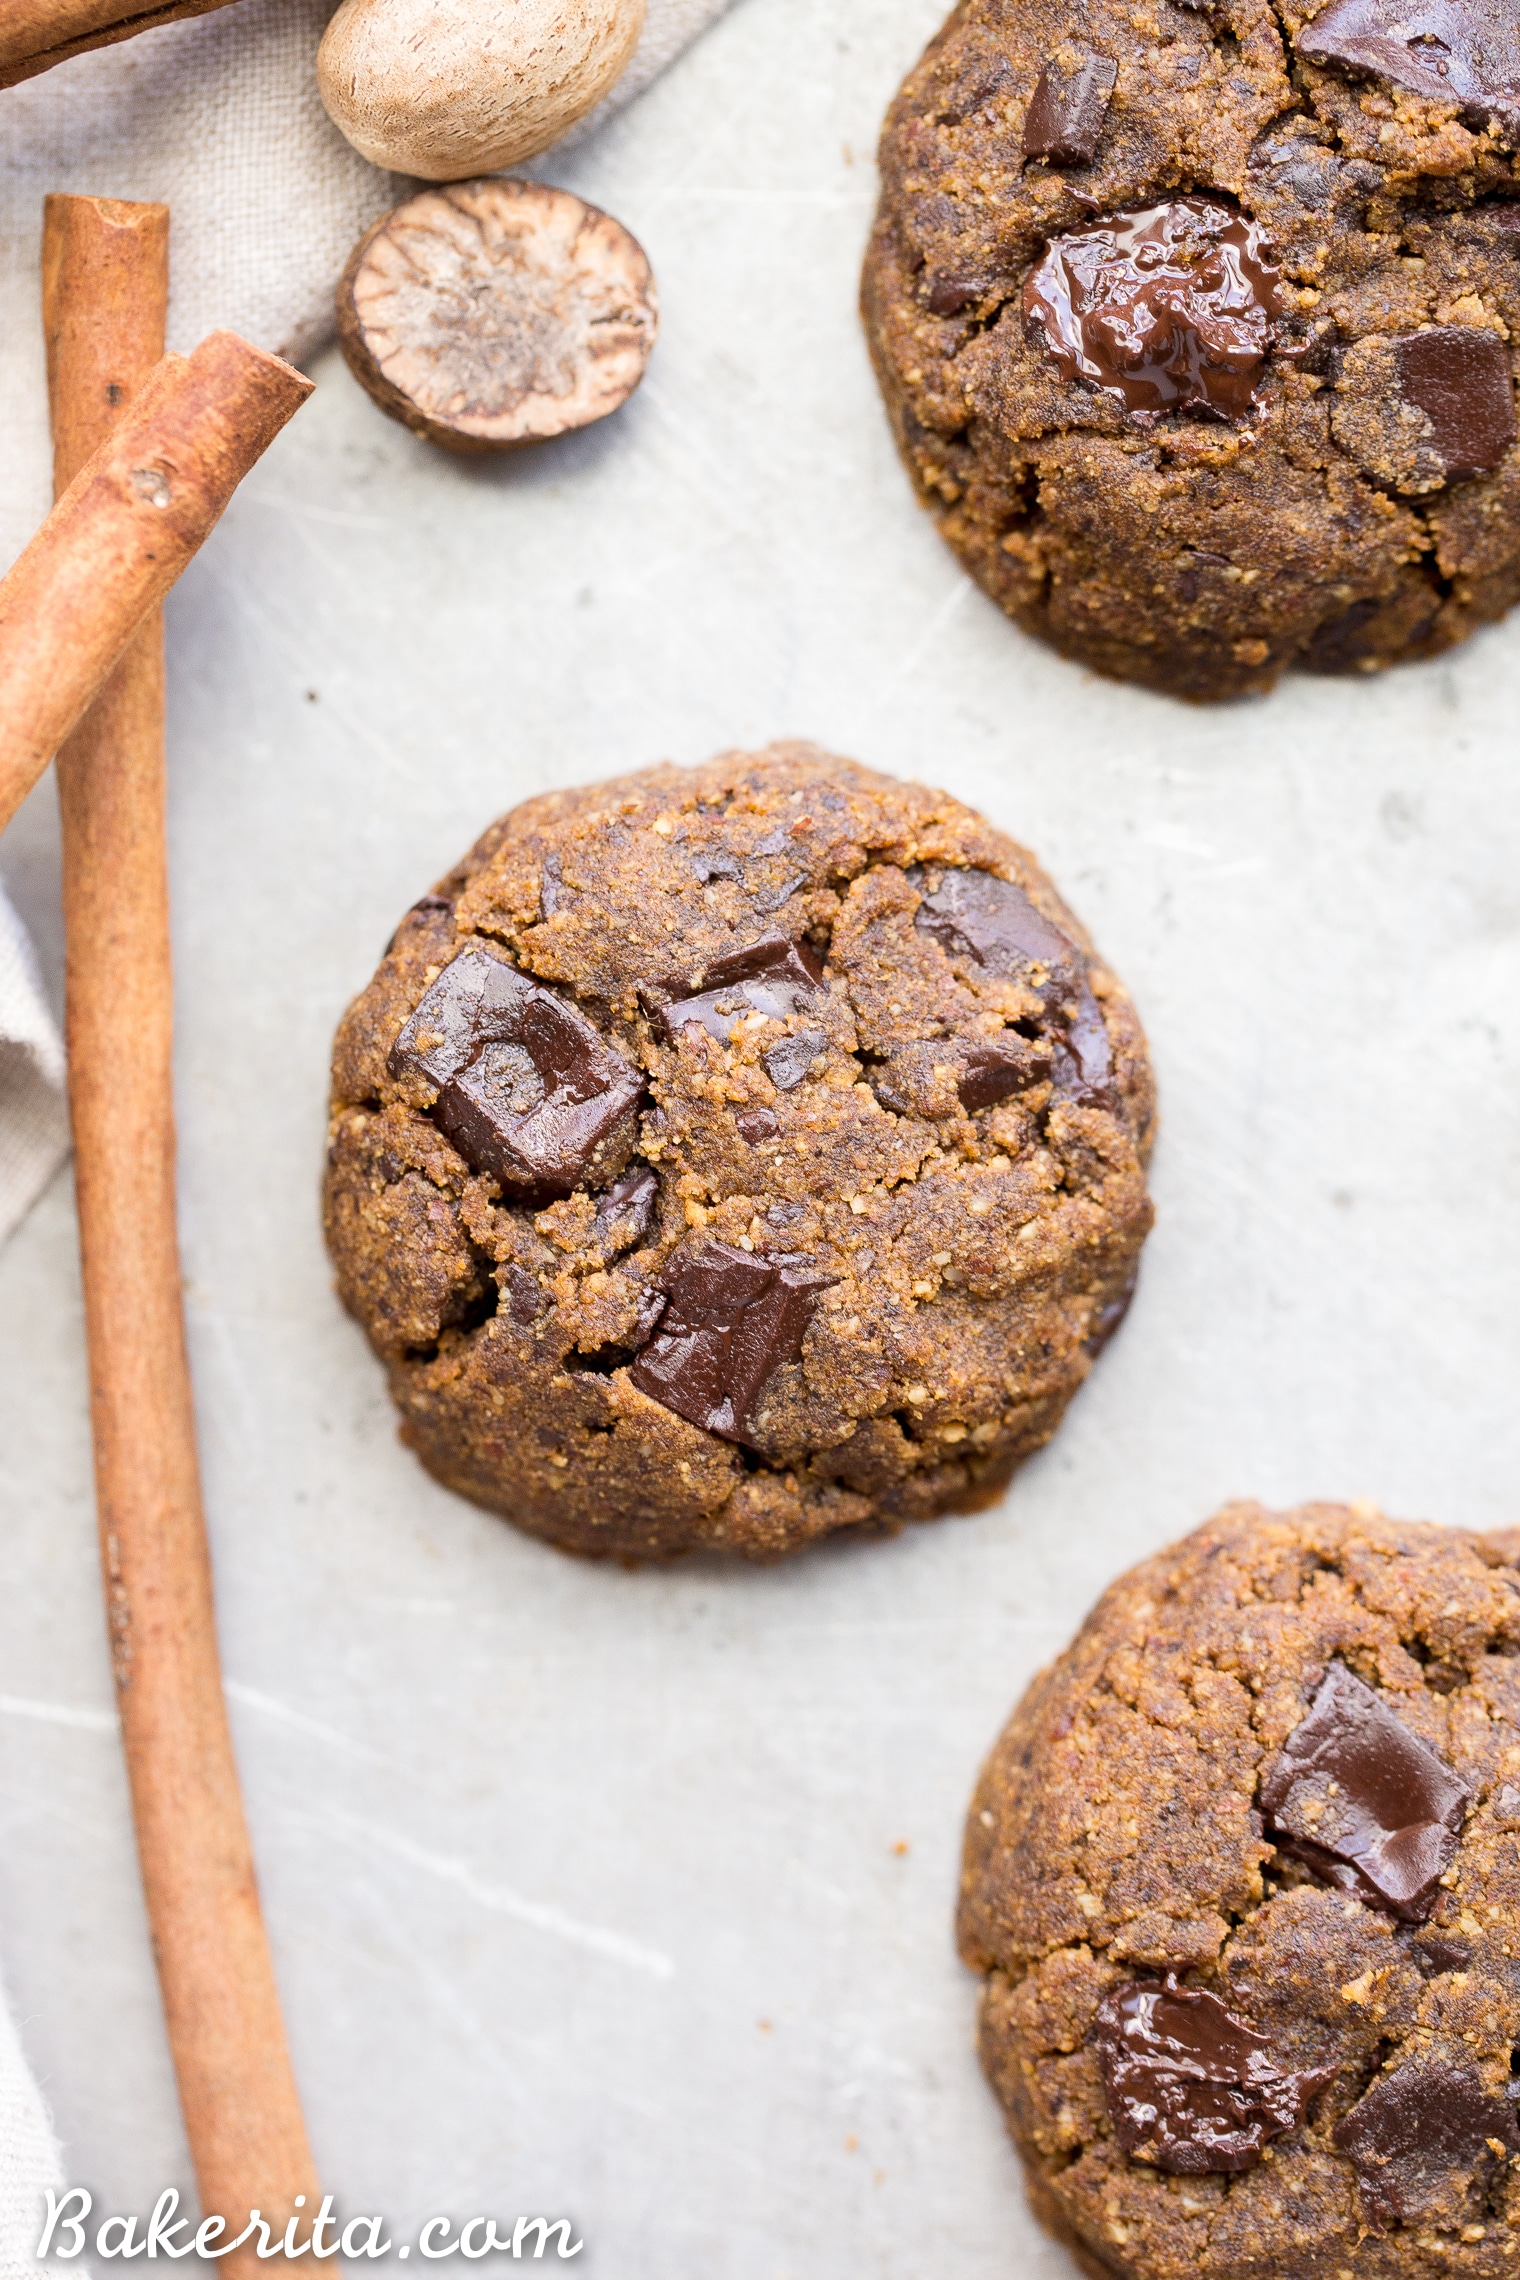 These Soft Chocolate Chip Pumpkin Cookies are a cakey and delicious spiced cookie that’s loaded with chocolate! If you like softer cookies, you’ll adore these gluten-free, paleo + vegan pumpkin cookies.